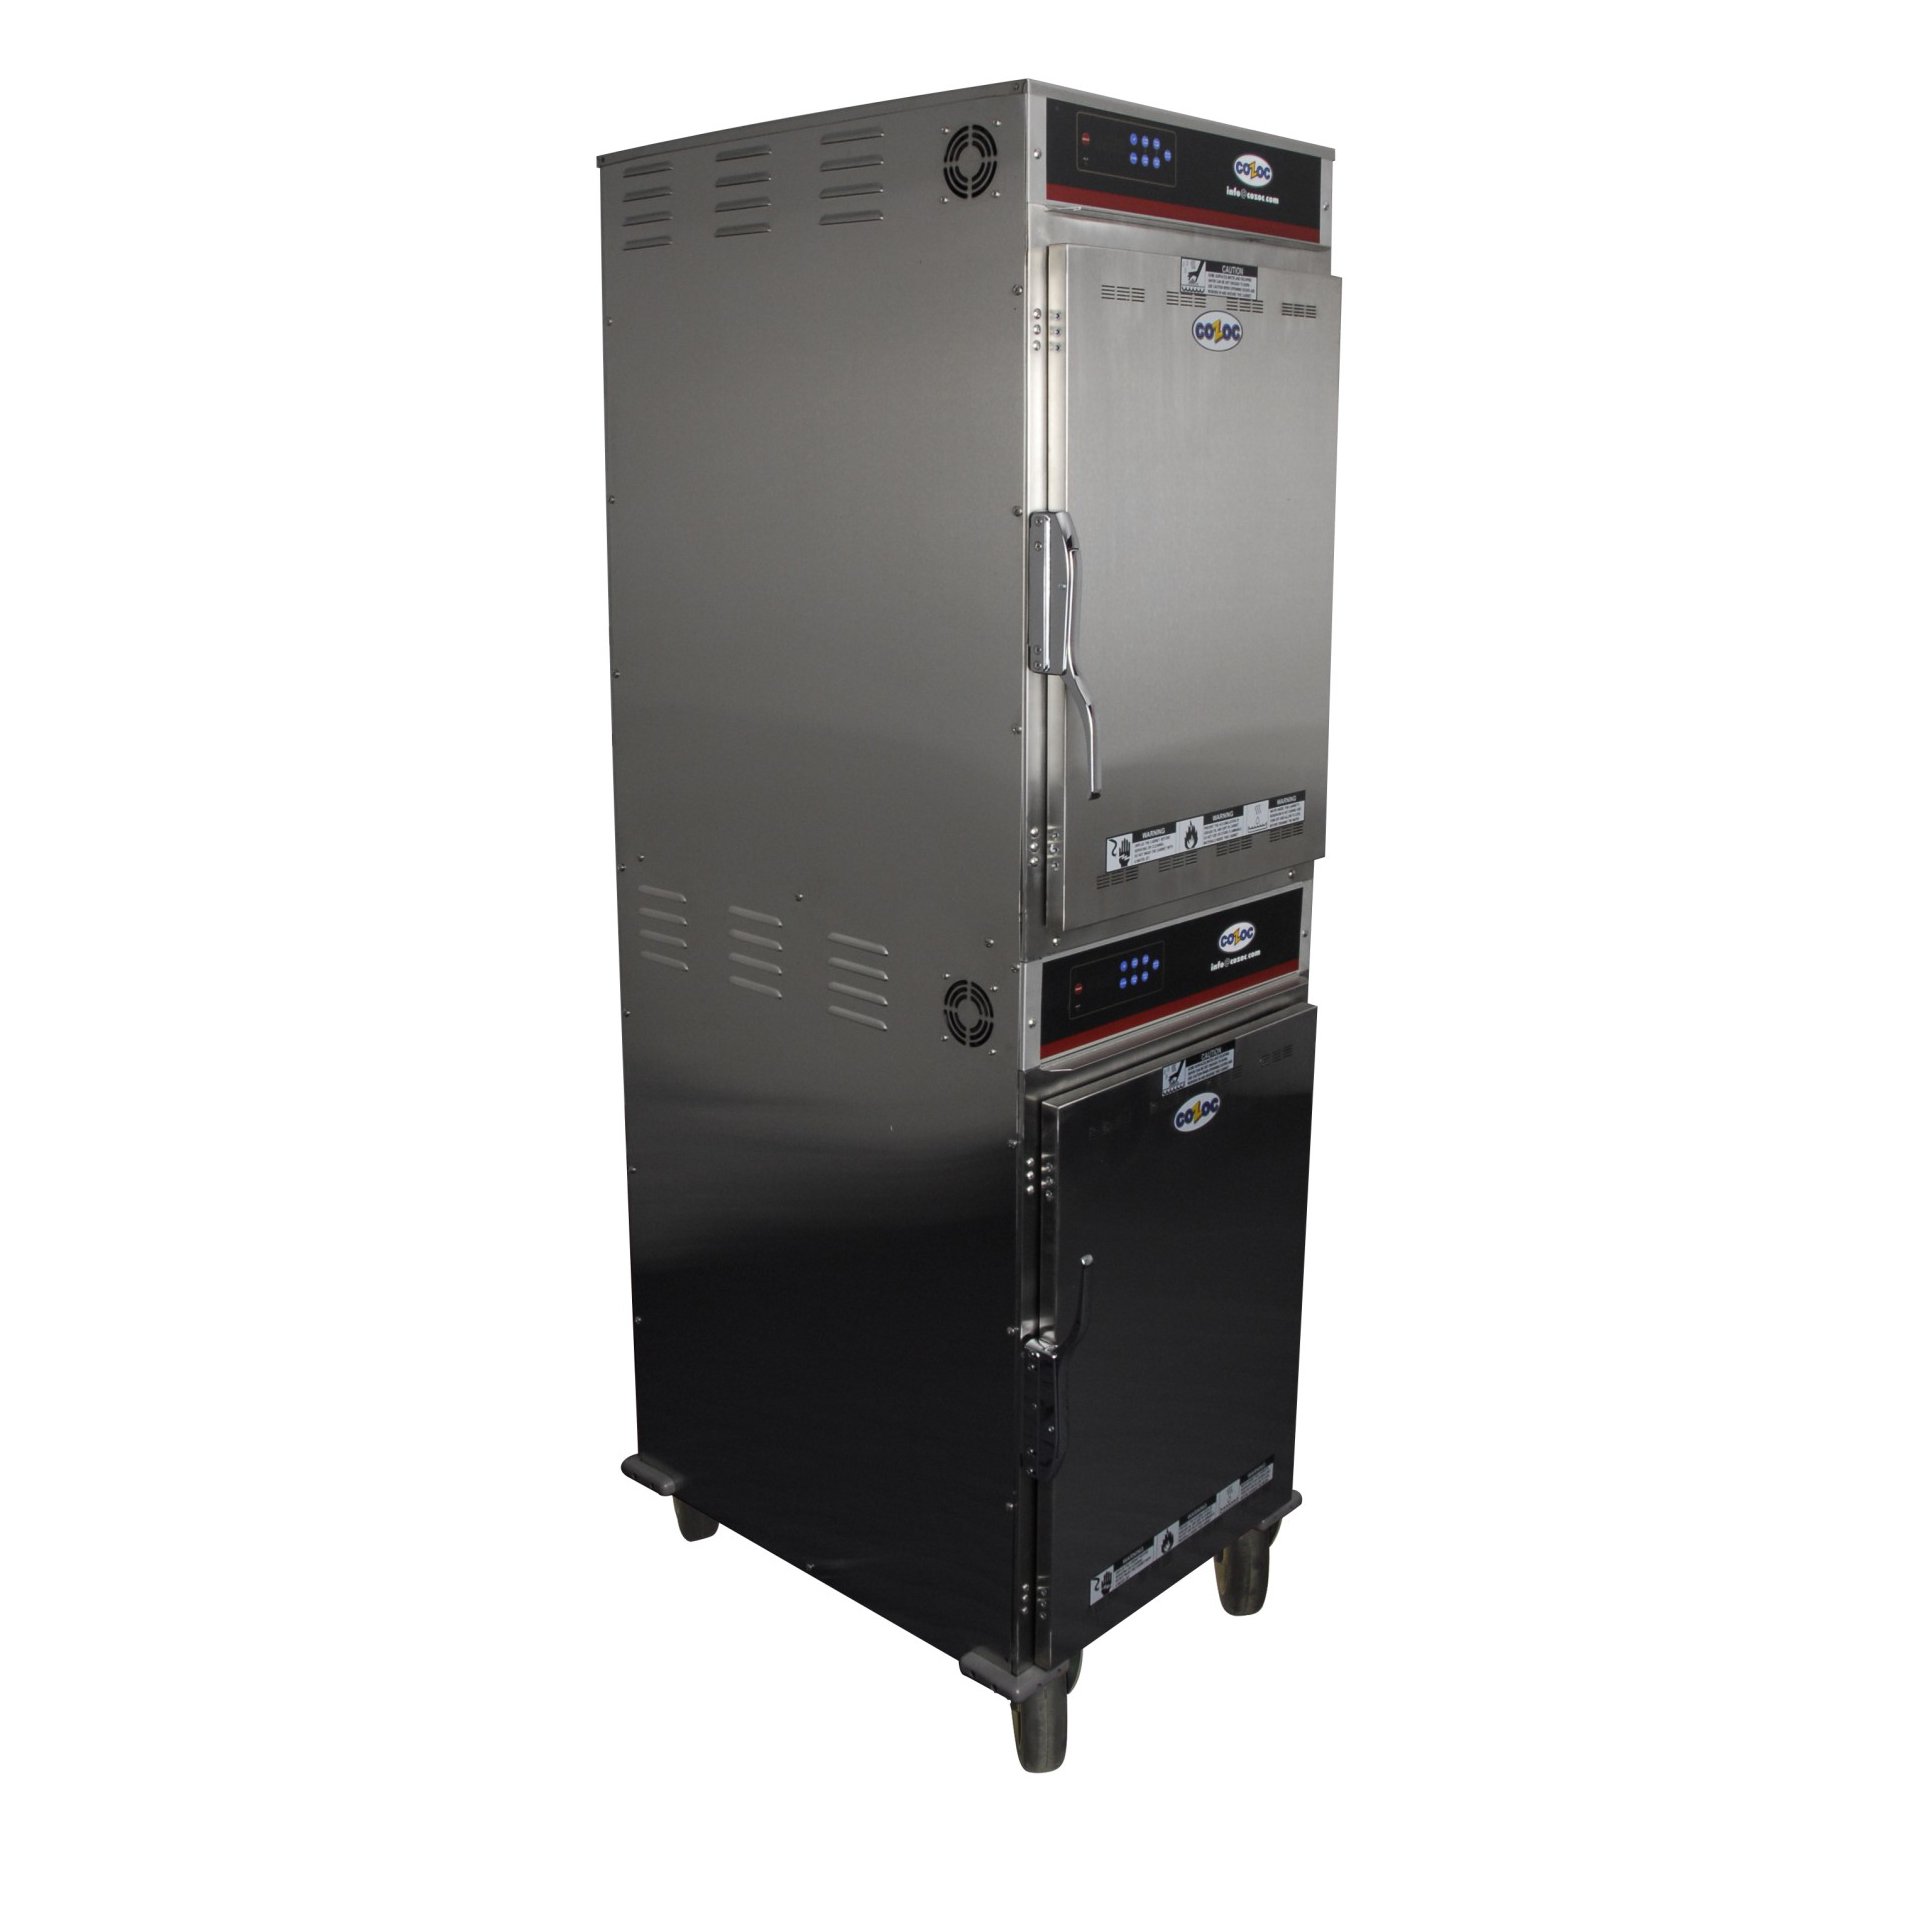 Cozoc HPC7013 Full-Height Mobile Cook / Hold / Oven Cabinet w/ Double-Deck, Digital Controls